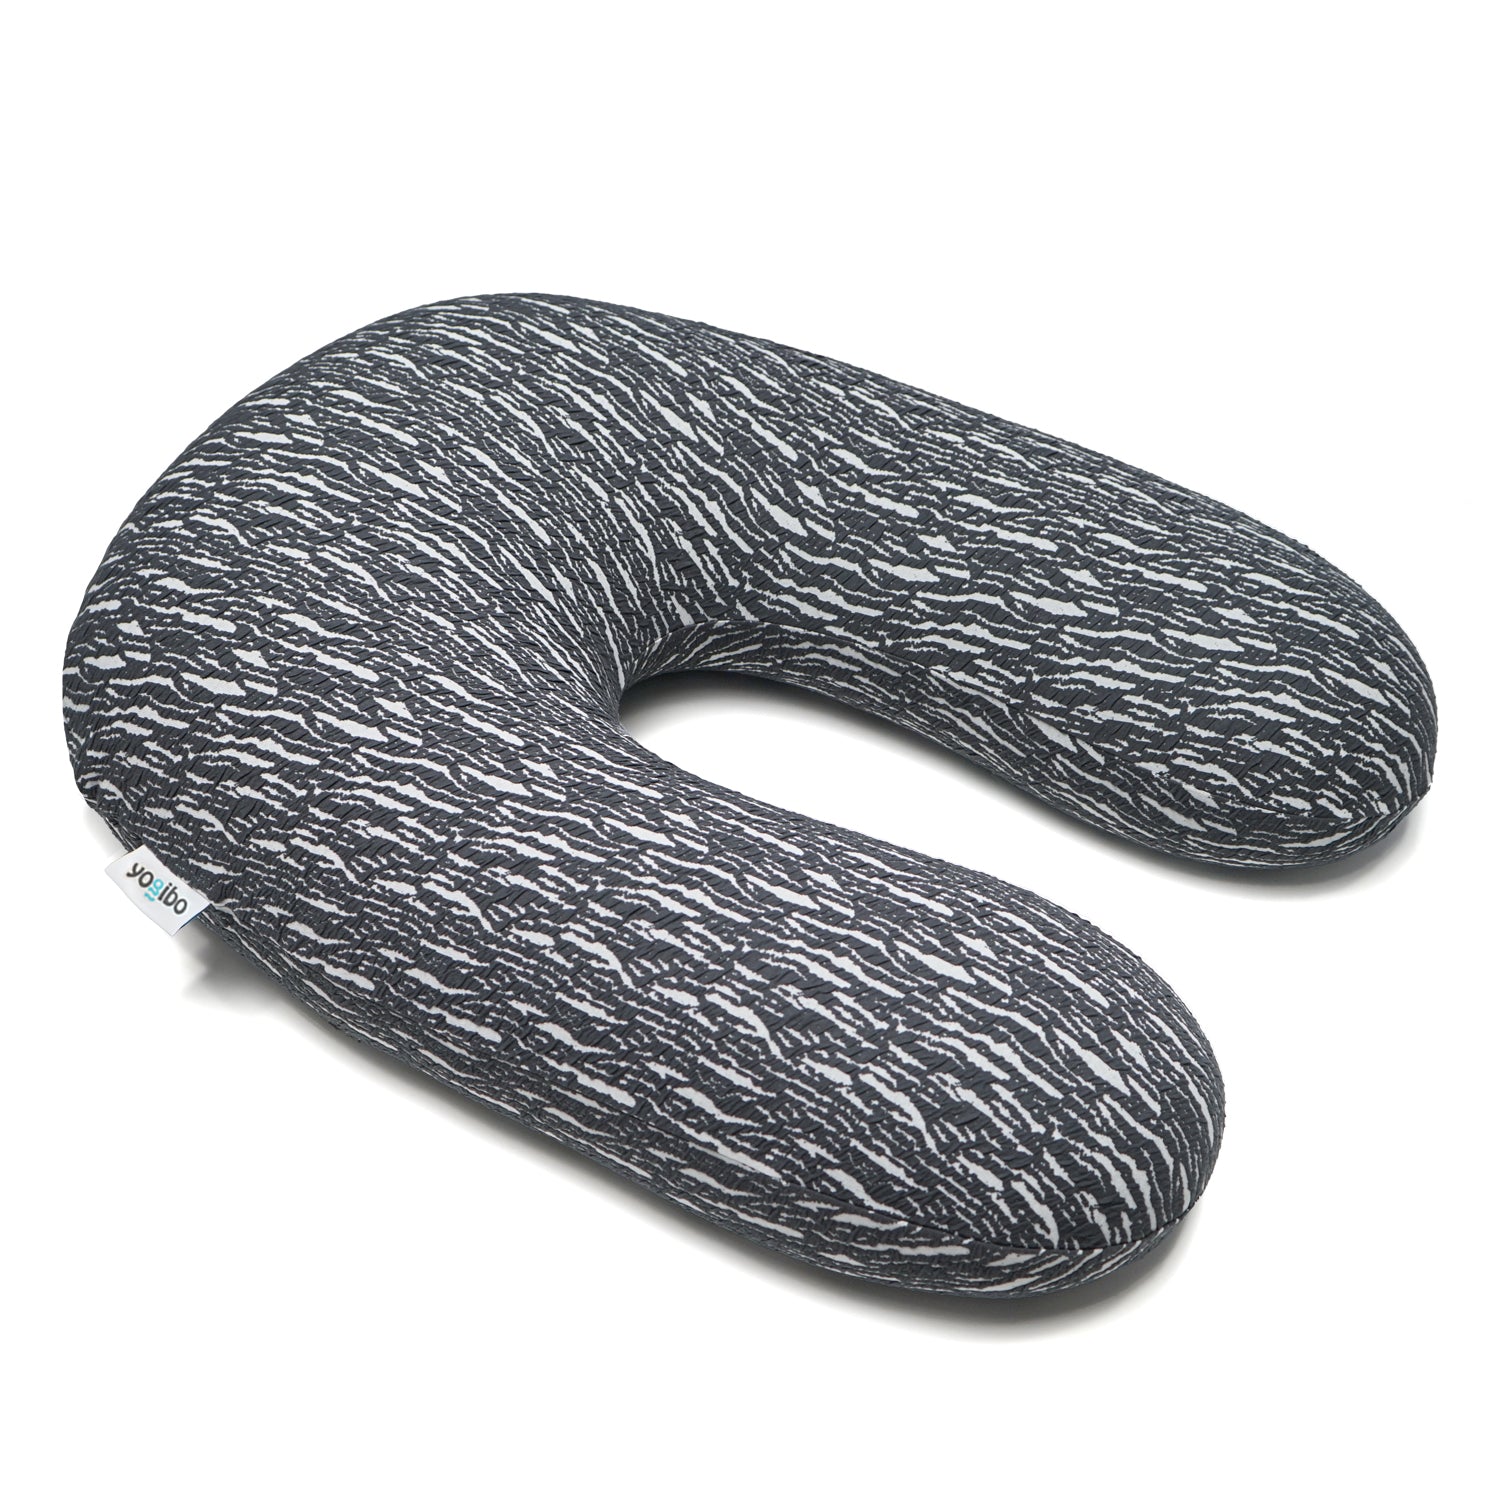 Yogibo luxe Support - Upscale Support Pillow - Yogibo®